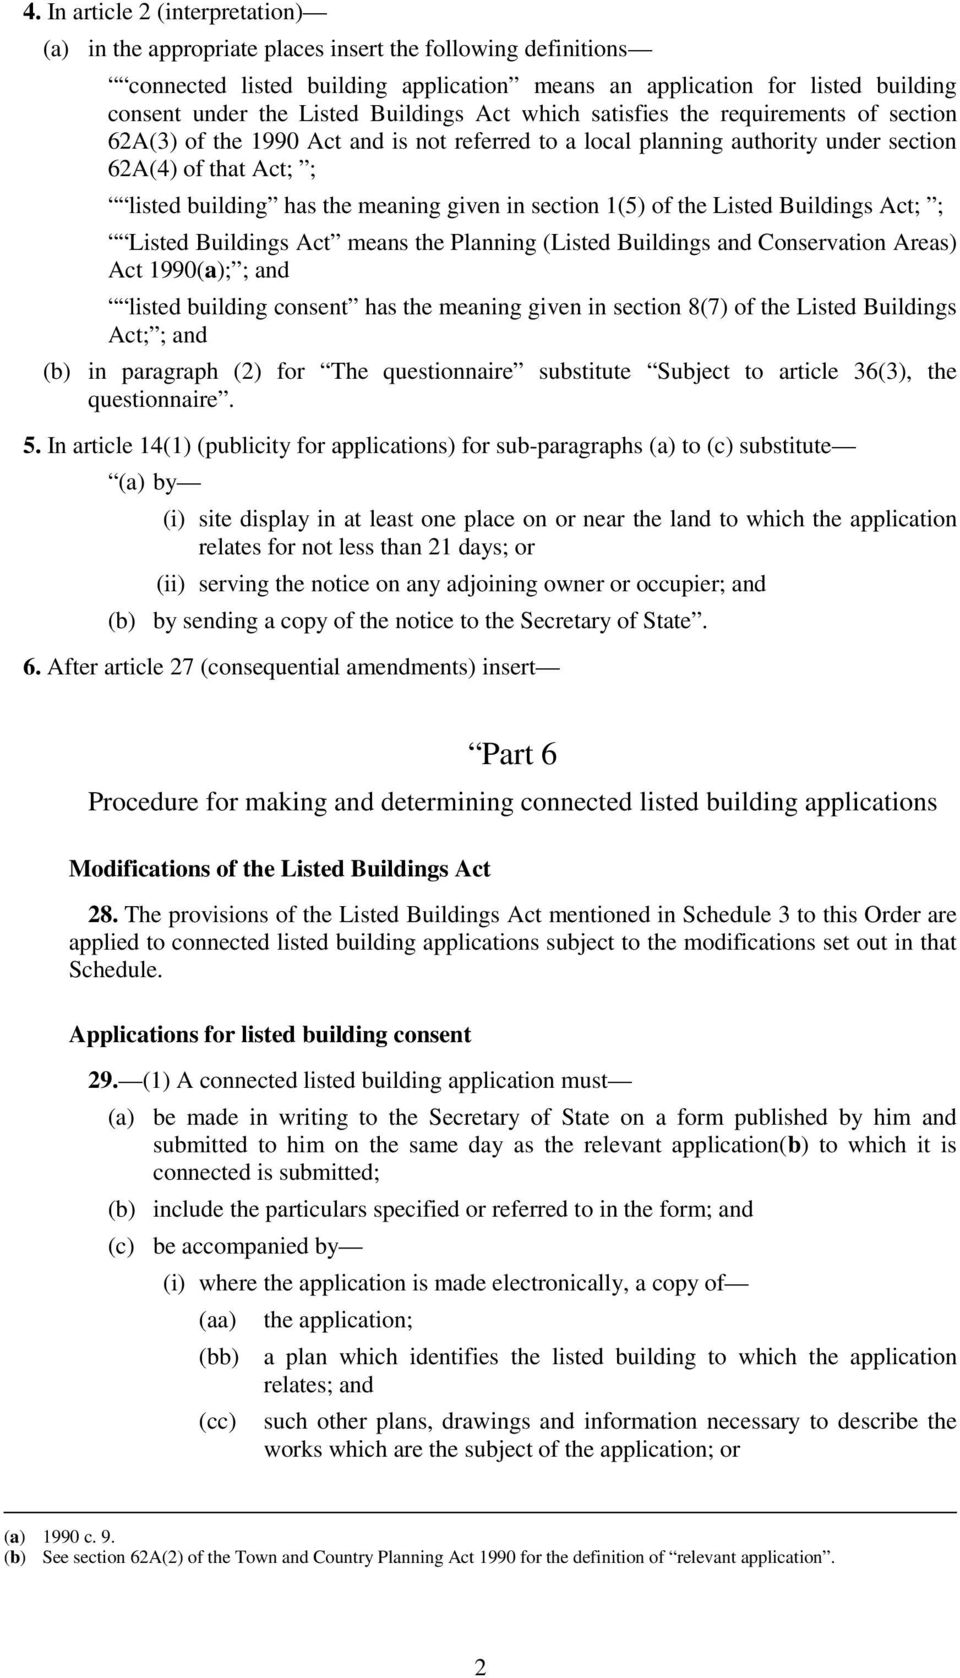 given in section 1(5) of the Listed Buildings Act; ; Listed Buildings Act means the Planning (Listed Buildings and Conservation Areas) Act 1990(a); ; and listed building consent has the meaning given